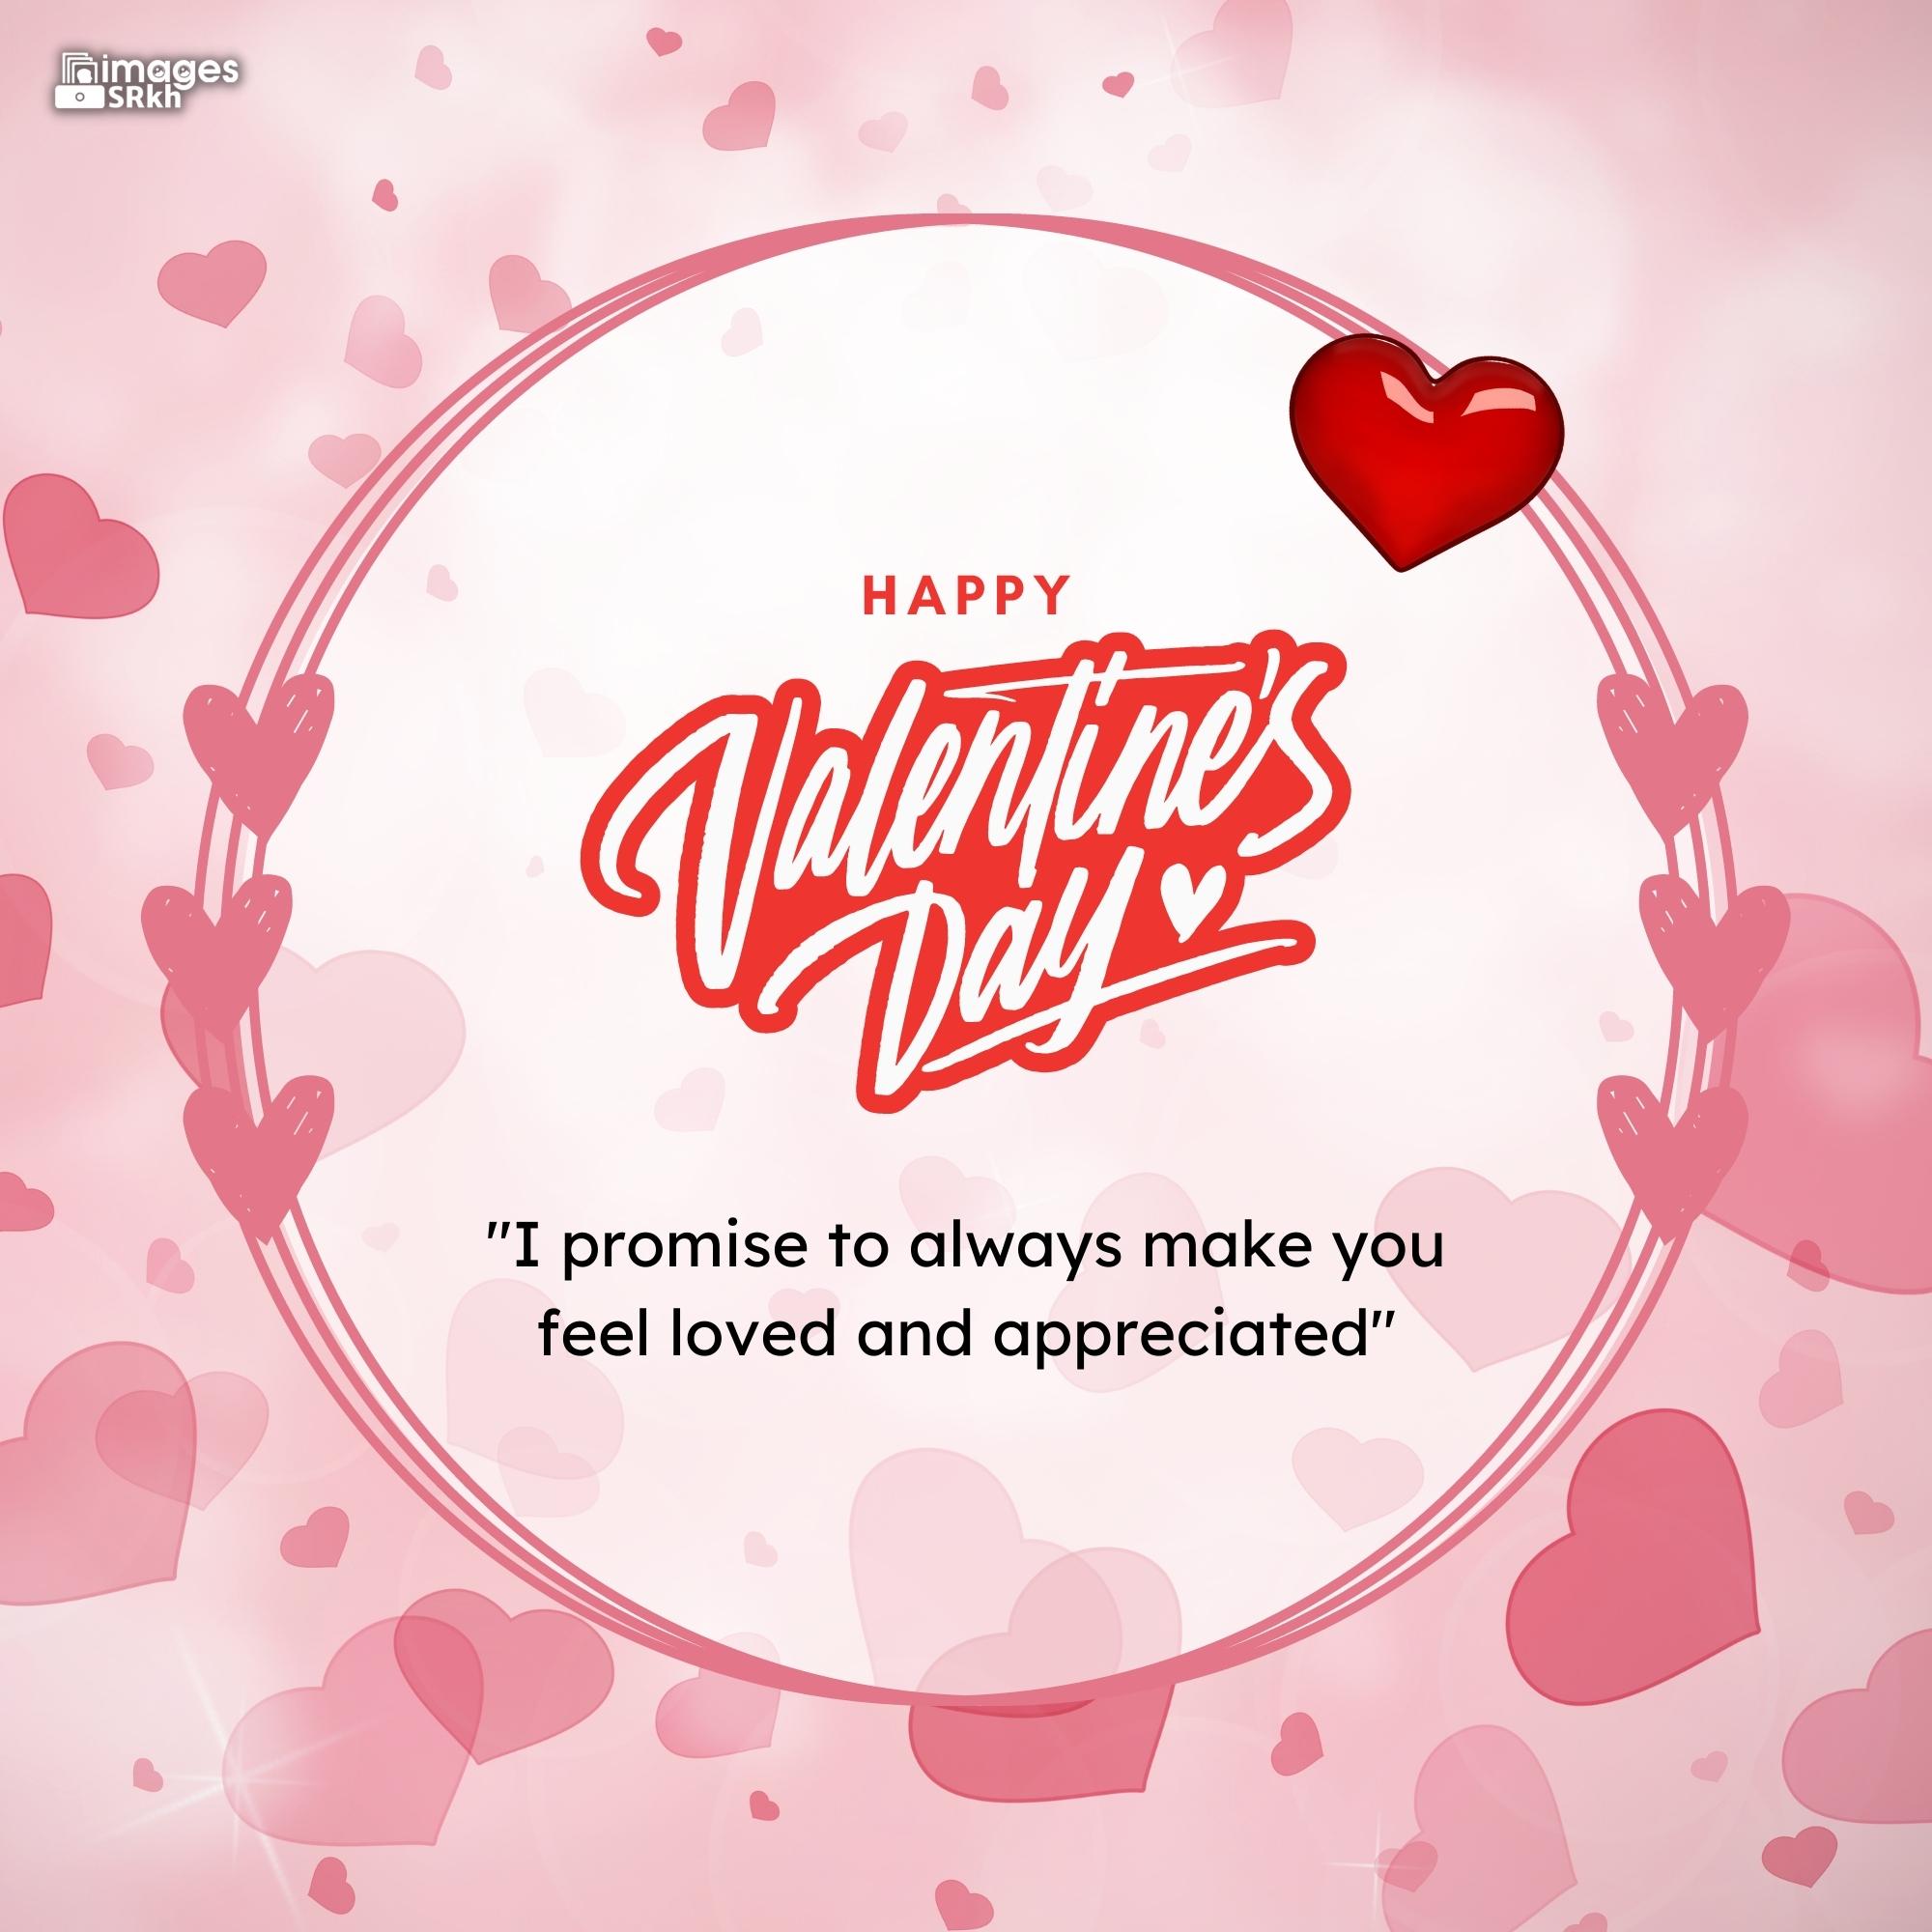 Happy Valentines Day | 511 | PREMIUM IMAGES | Wishes for Love